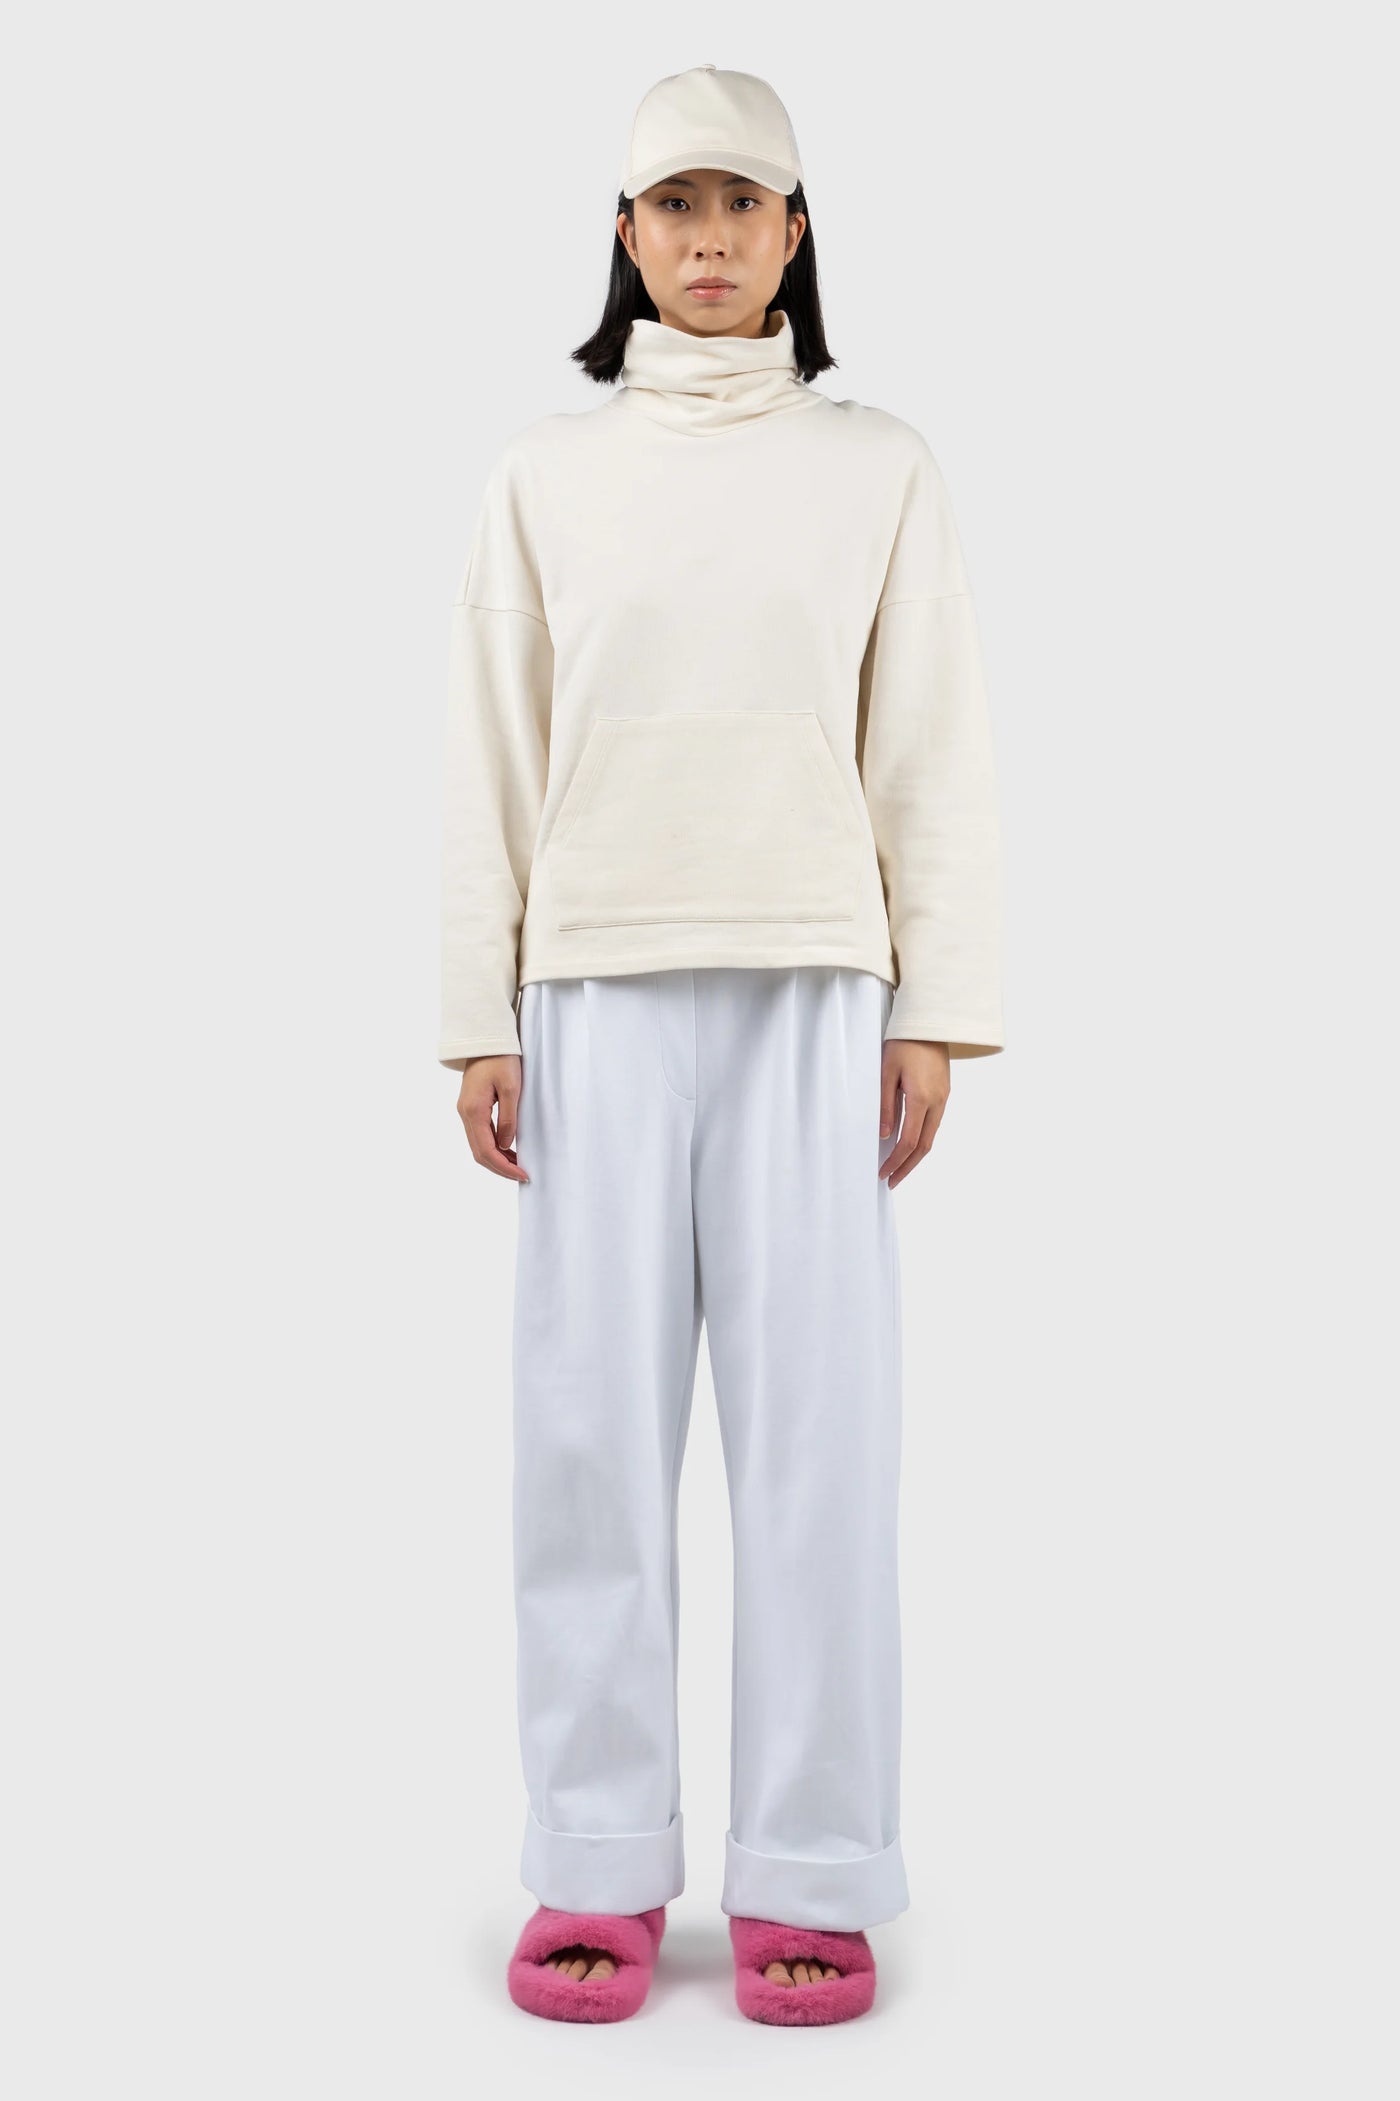 Funnel Neck Sweatshirt with dropped shoulder